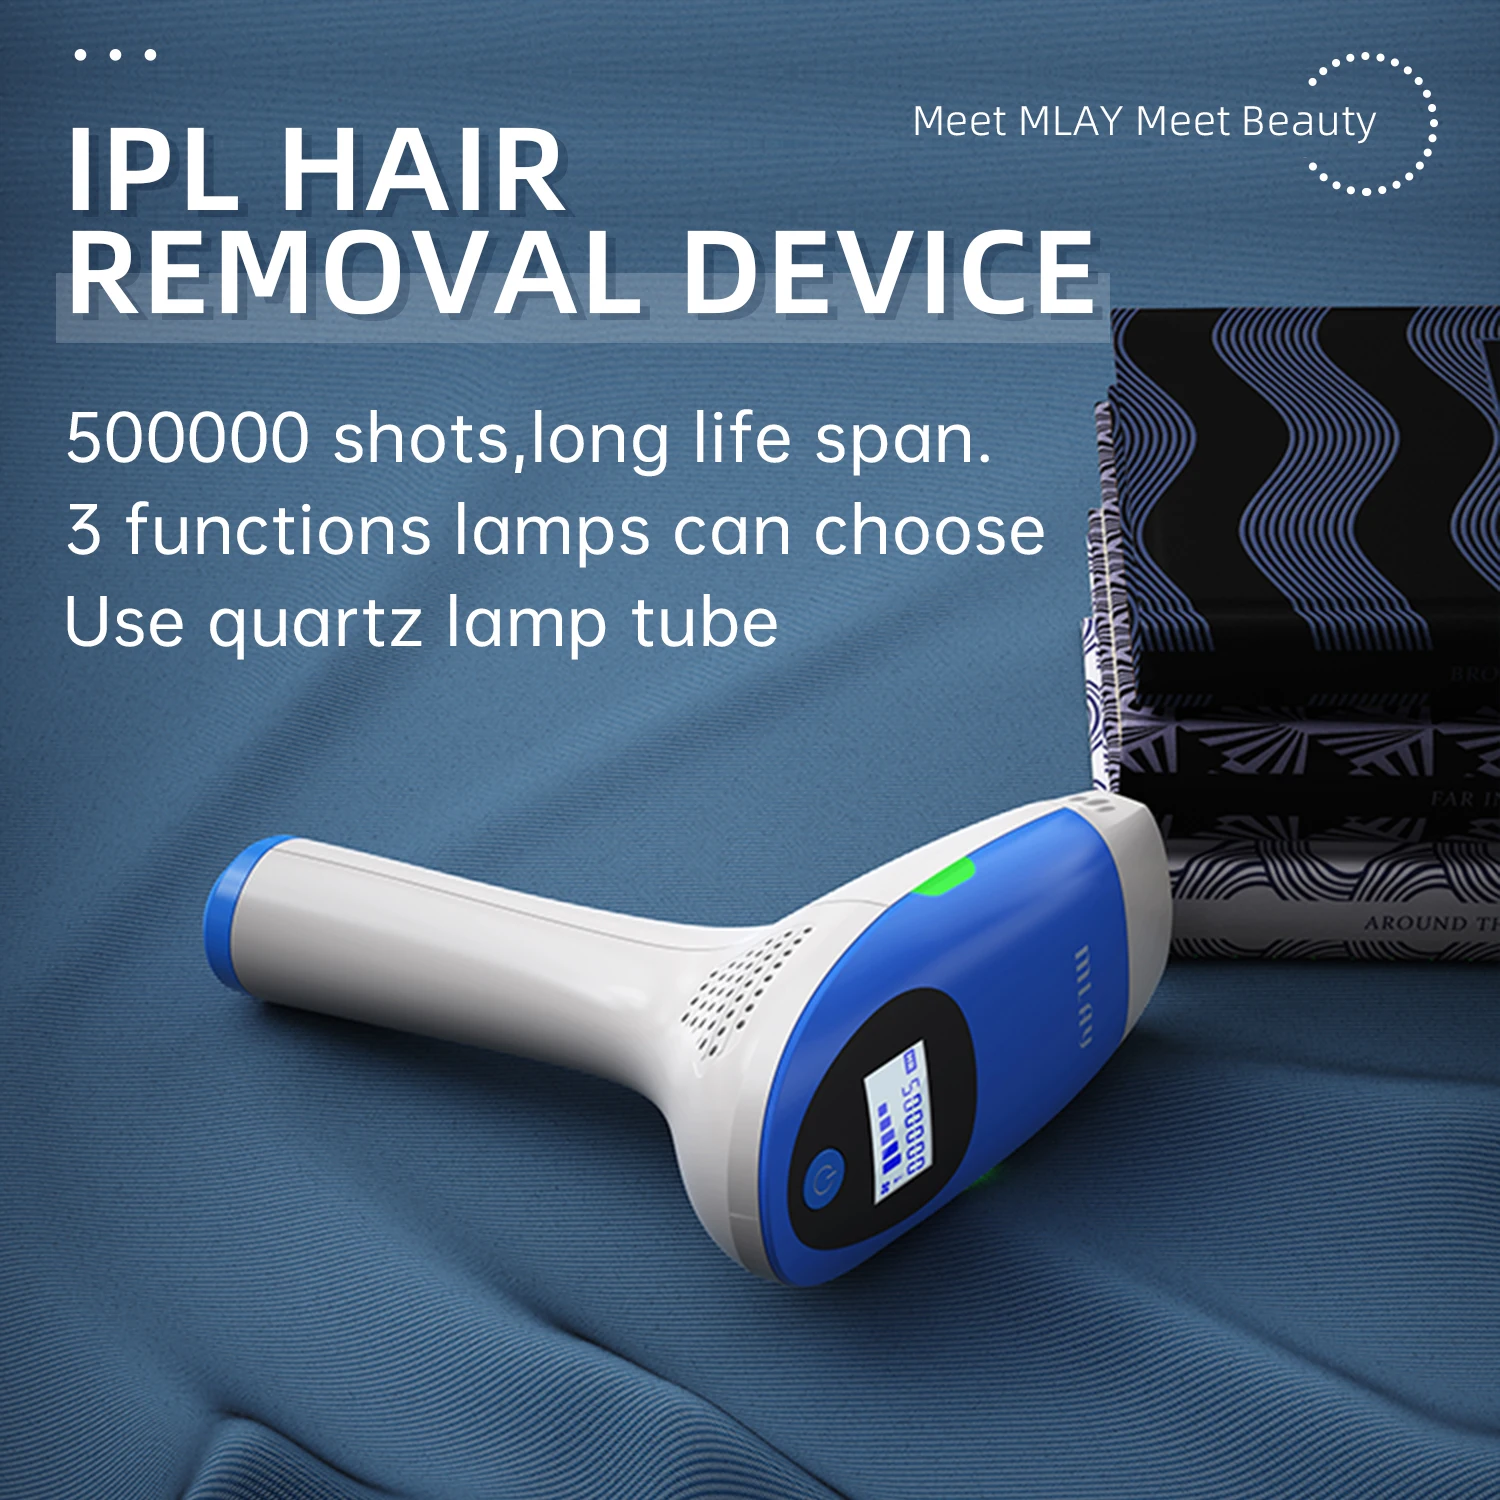 MLay Portable 3-in-1 Epilator Lady Home Use Hair Removal Device with 500000 Flash IPL Permanent Epilator for AU/JP Plug